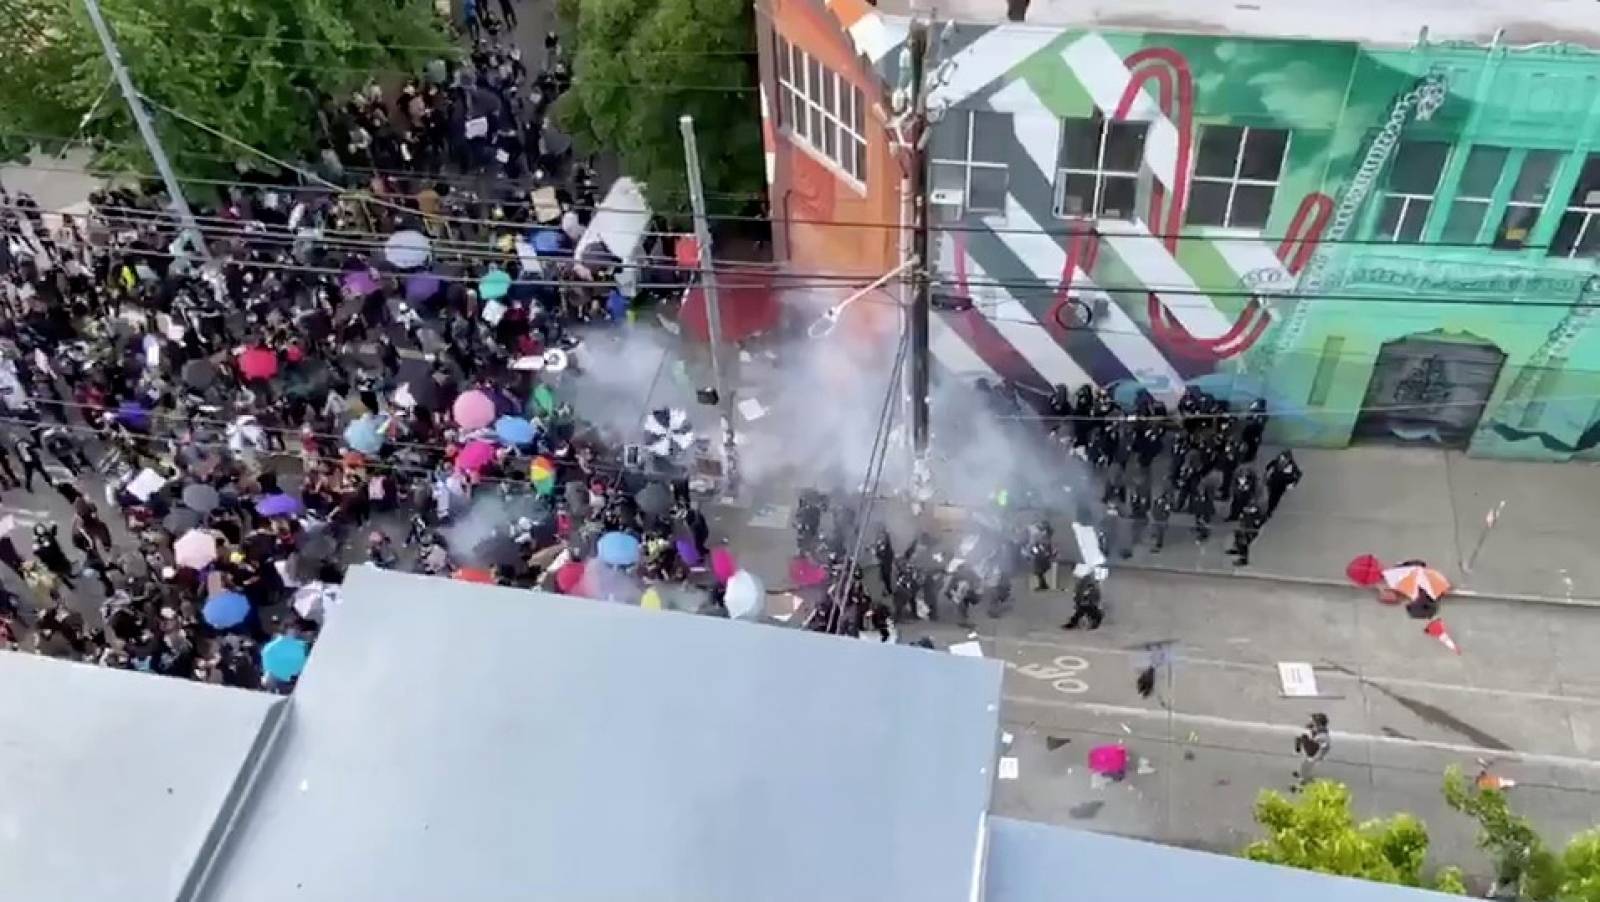 Social media video grab of police clashing with demonstrators during a protest against racial inequality in the aftermath of the death in Minneapolis police custody of George Floyd, in Seattle